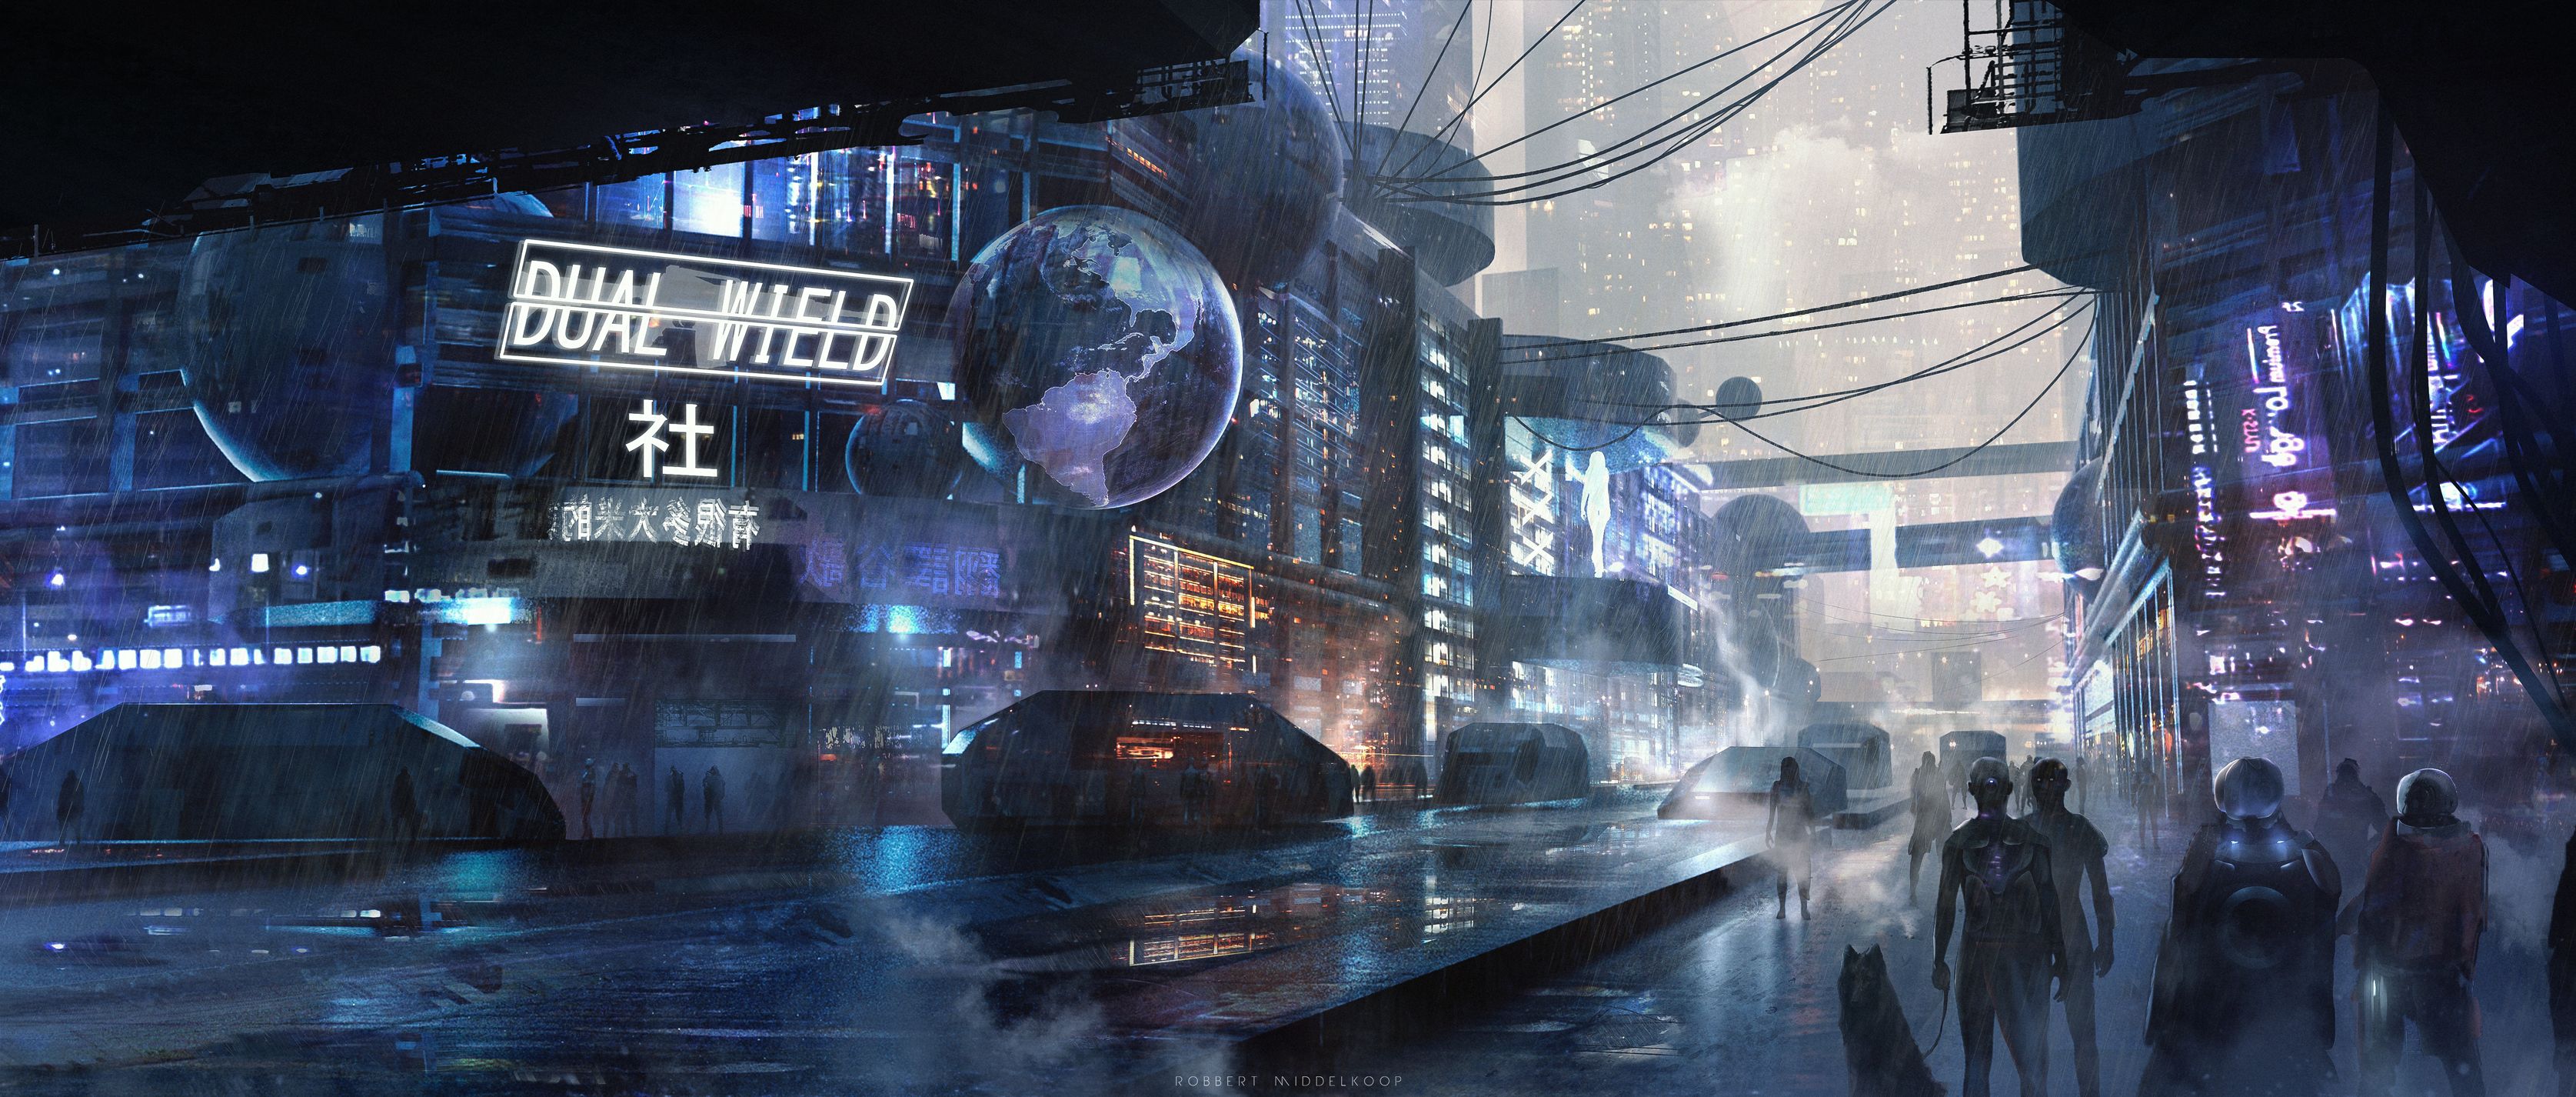 Mobile wallpaper: People, Rain, City, Building, Sci Fi, Futuristic,  Vehicle, 879362 download the picture for free.